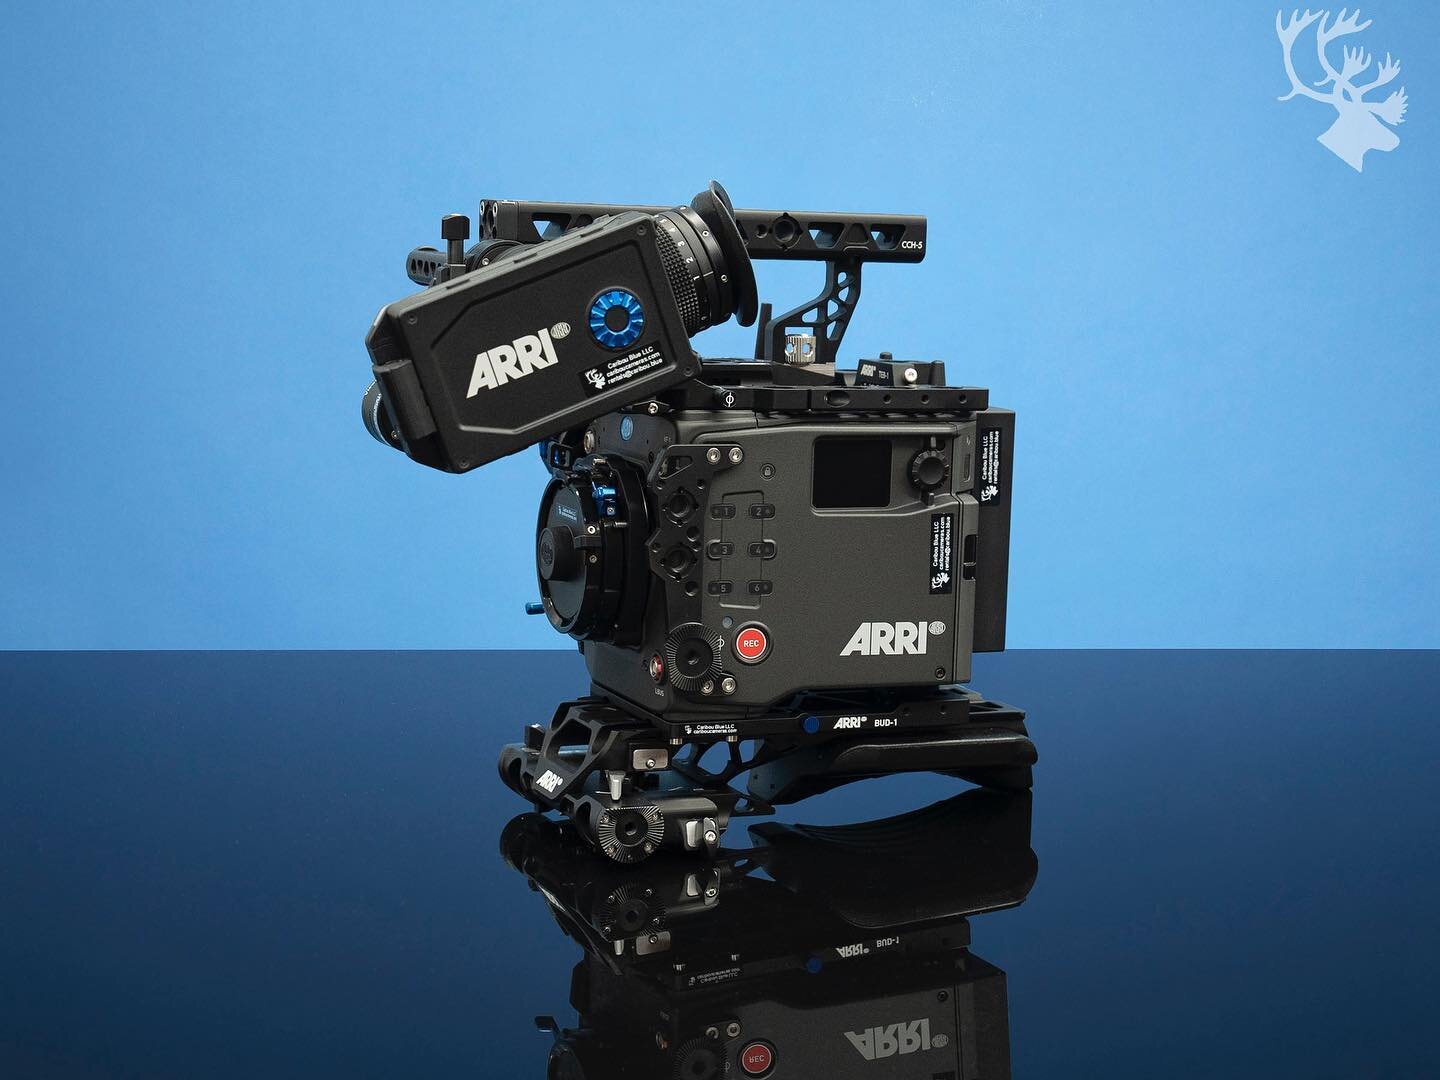 Alexa 35 babyyyyyyy. Head over to @cariboucameras to rent this mf. Don&rsquo;t forget the hi-5 too!

Gimme a shout if you want to take things for a test drive!

#arri #alexa35 #cinematography #setlife